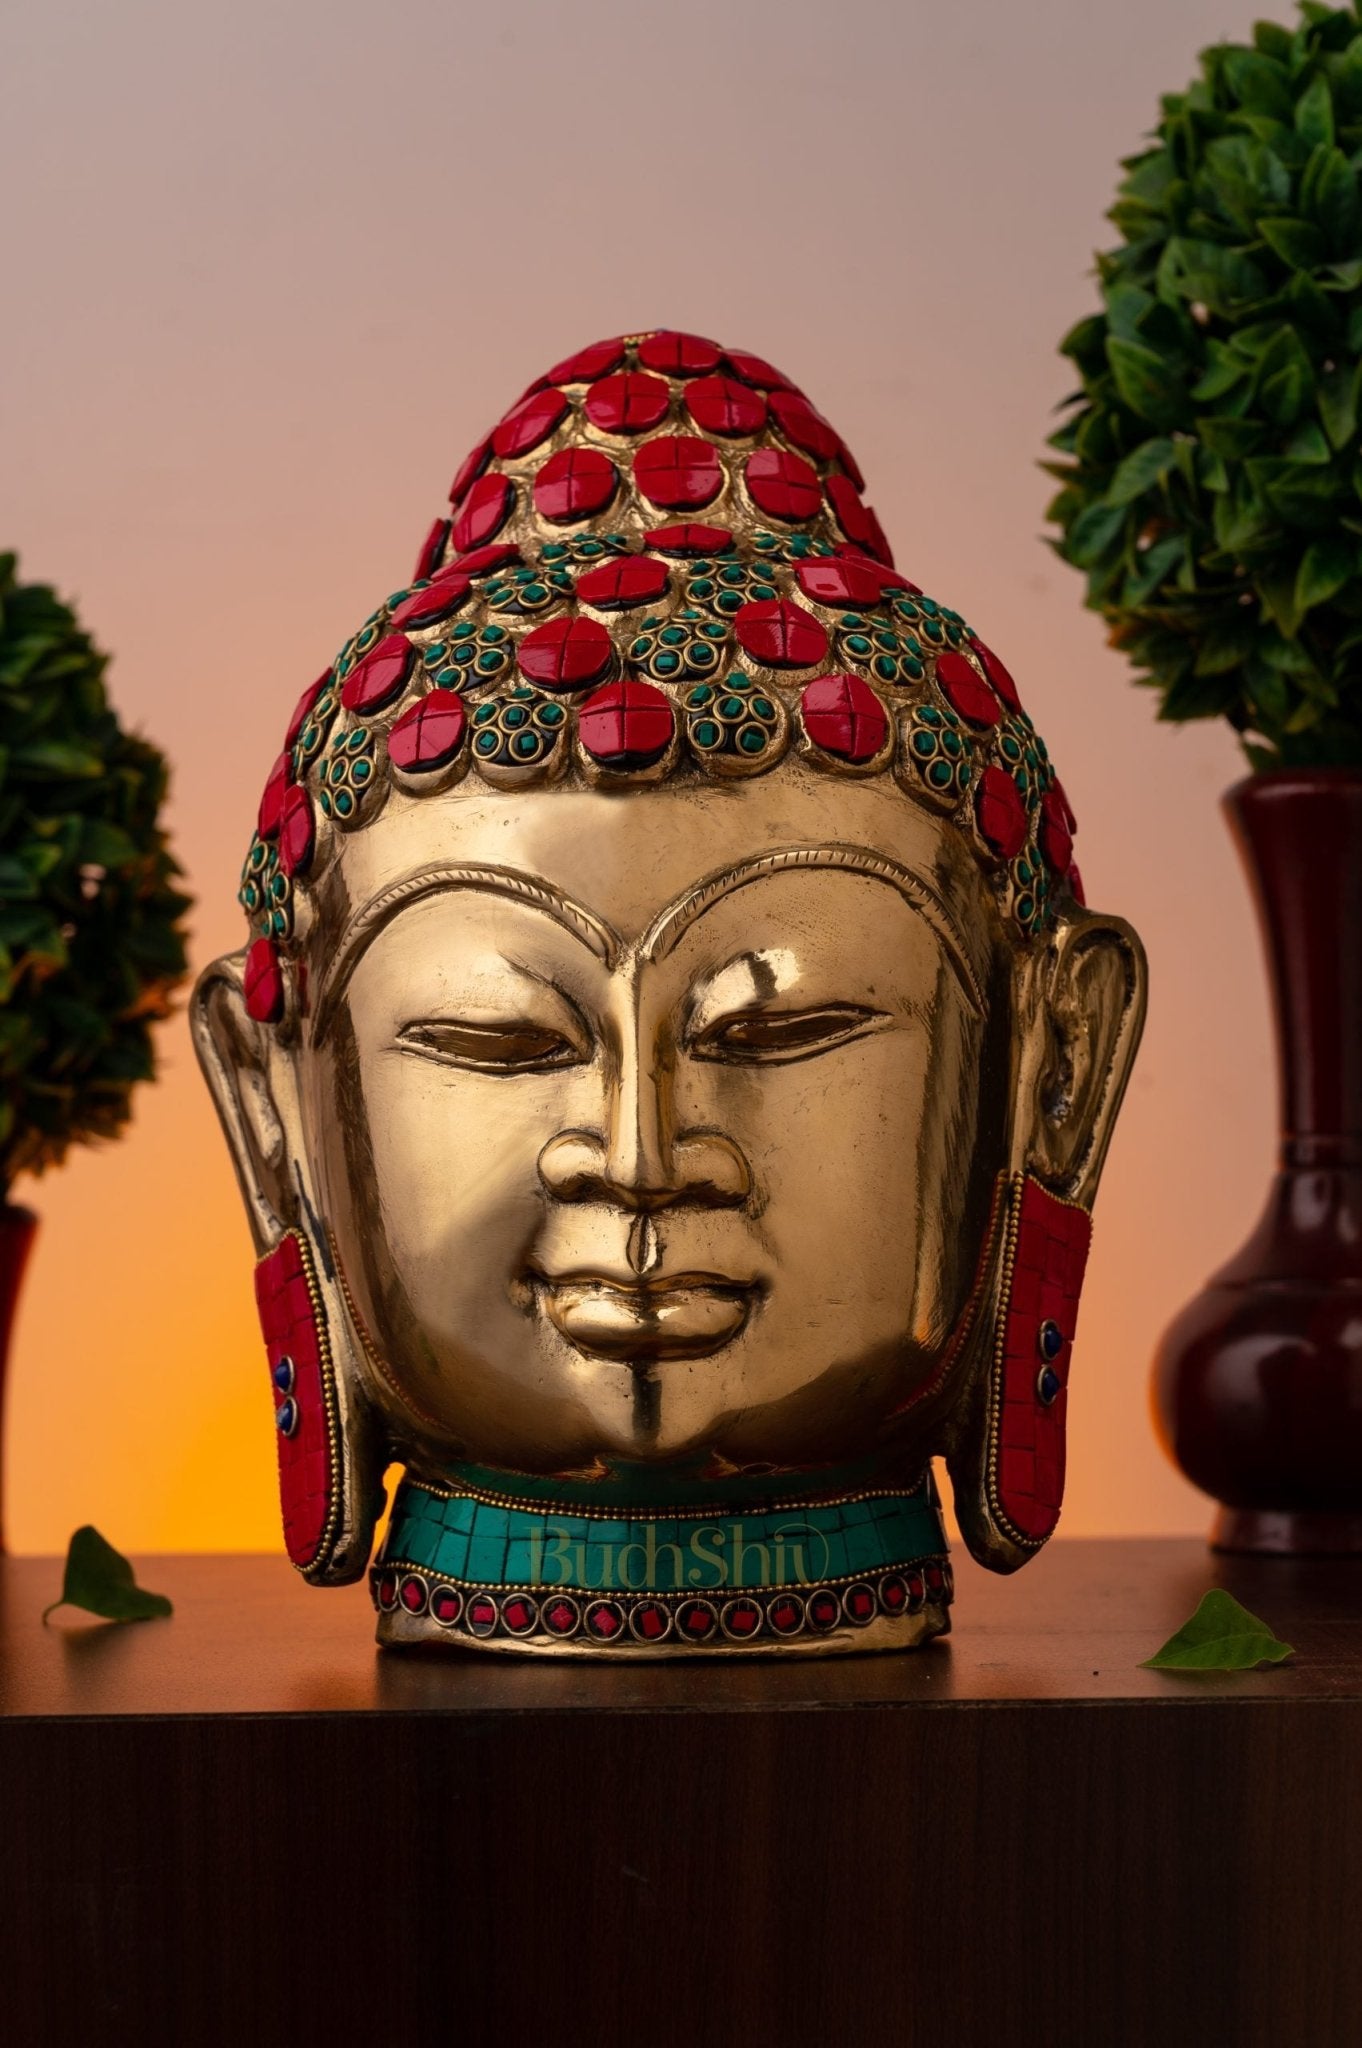 Buddha Head: Inspiring Self-Knowledge for Your Home - 11.5 Inches - Budhshiv.com